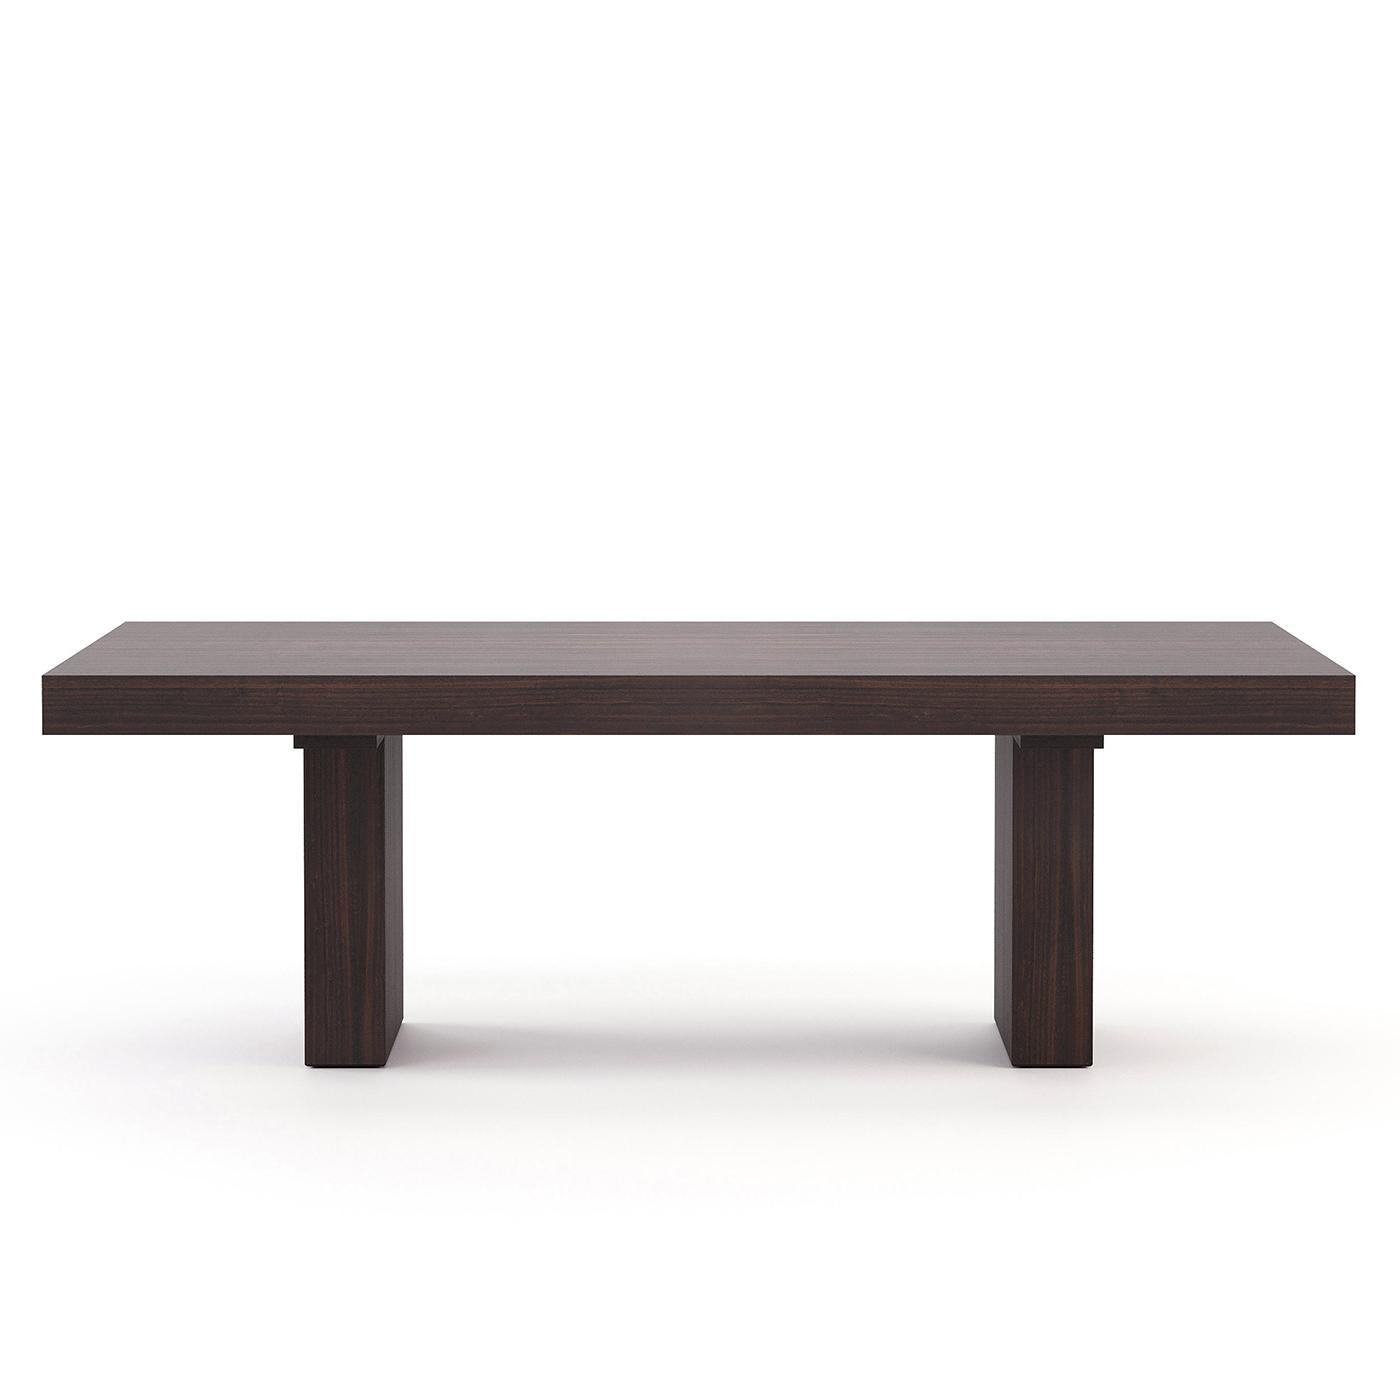 Dining table Andora with all structure in 
eucalyptus wood veneer in smocked matte finish. 
Measures: L 240 x D 120 x H 78cm, price: 5490,00€
Also available in ebony glossy, or in grey eucalyptus glossy
or matte, or in old-aged oak matte, or in